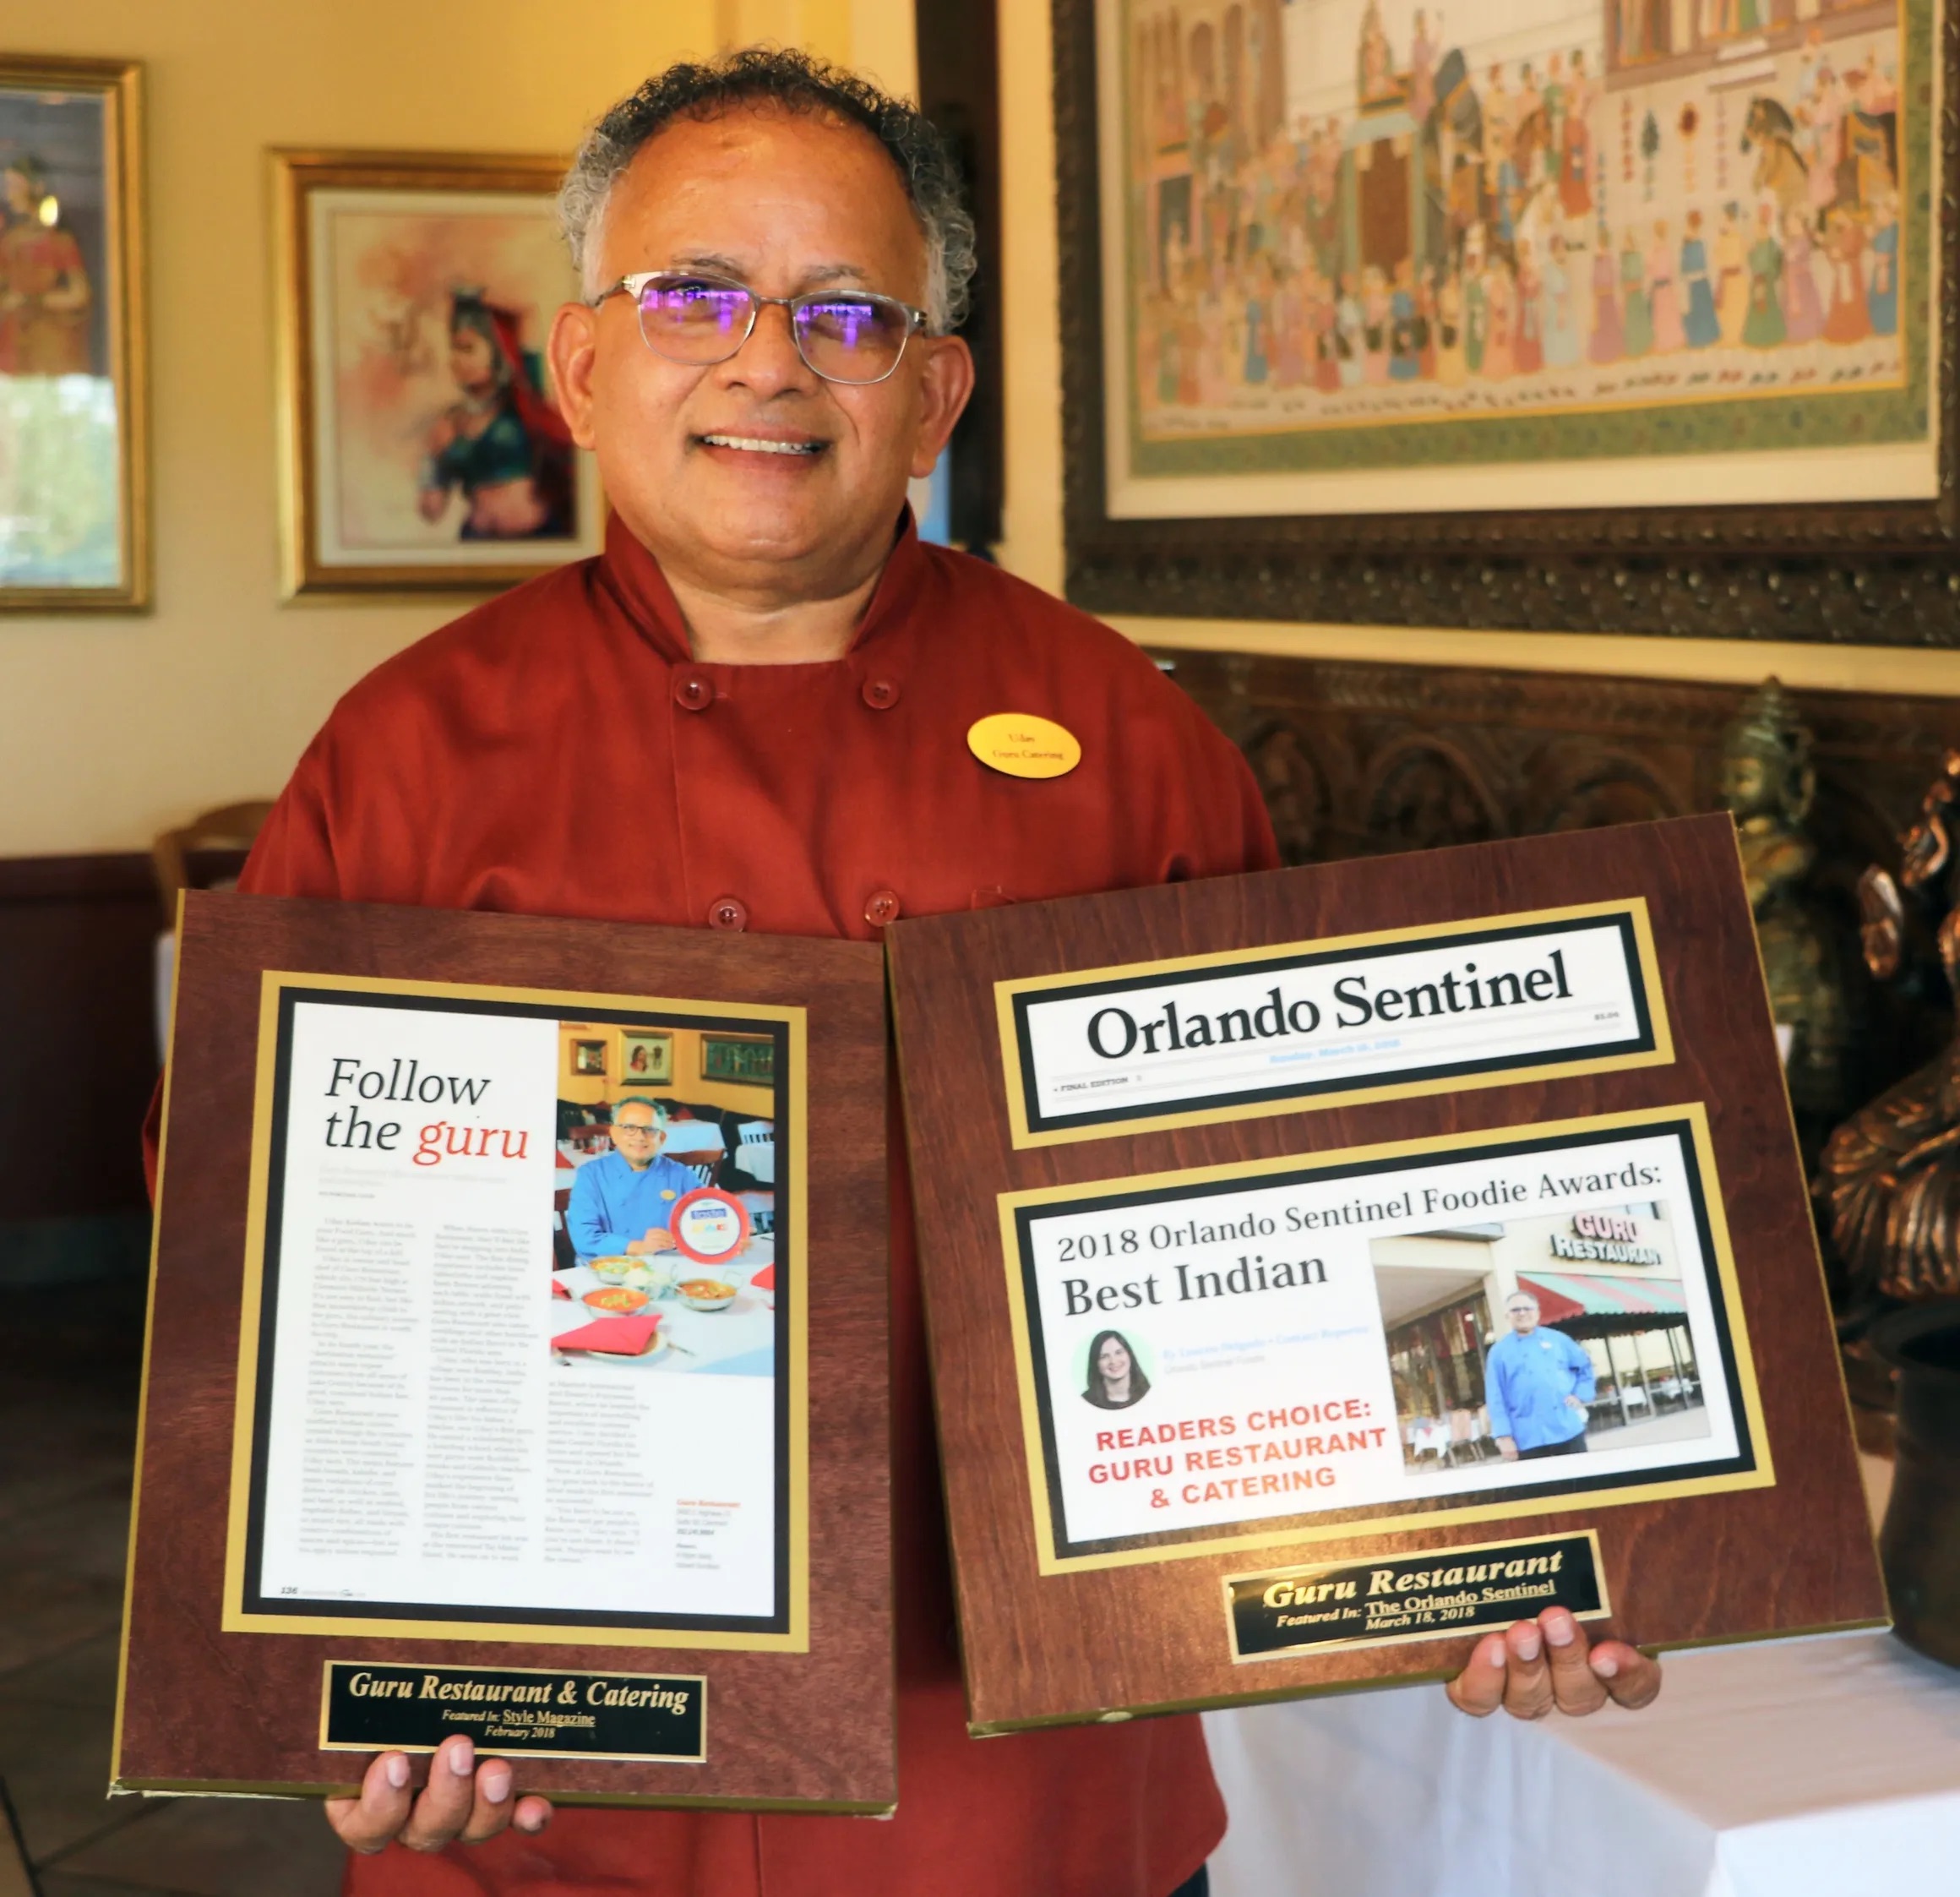 Chef Uday standing and holding more awards that he received for his restaurant Guru